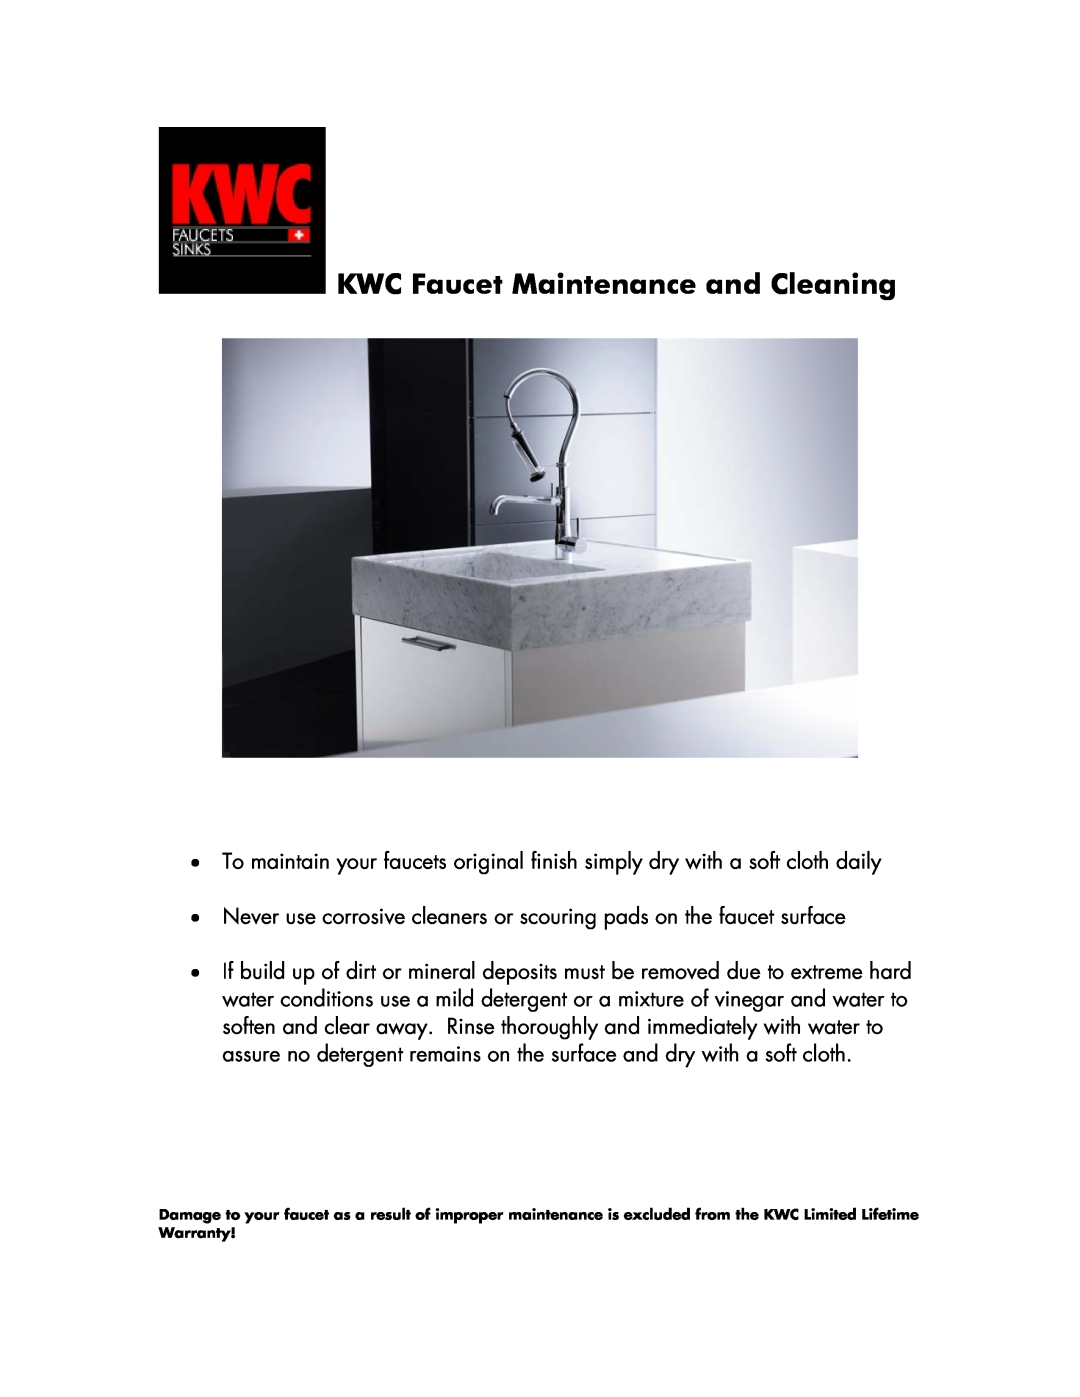 KWC none warranty KWC Faucet Maintenance and Cleaning 